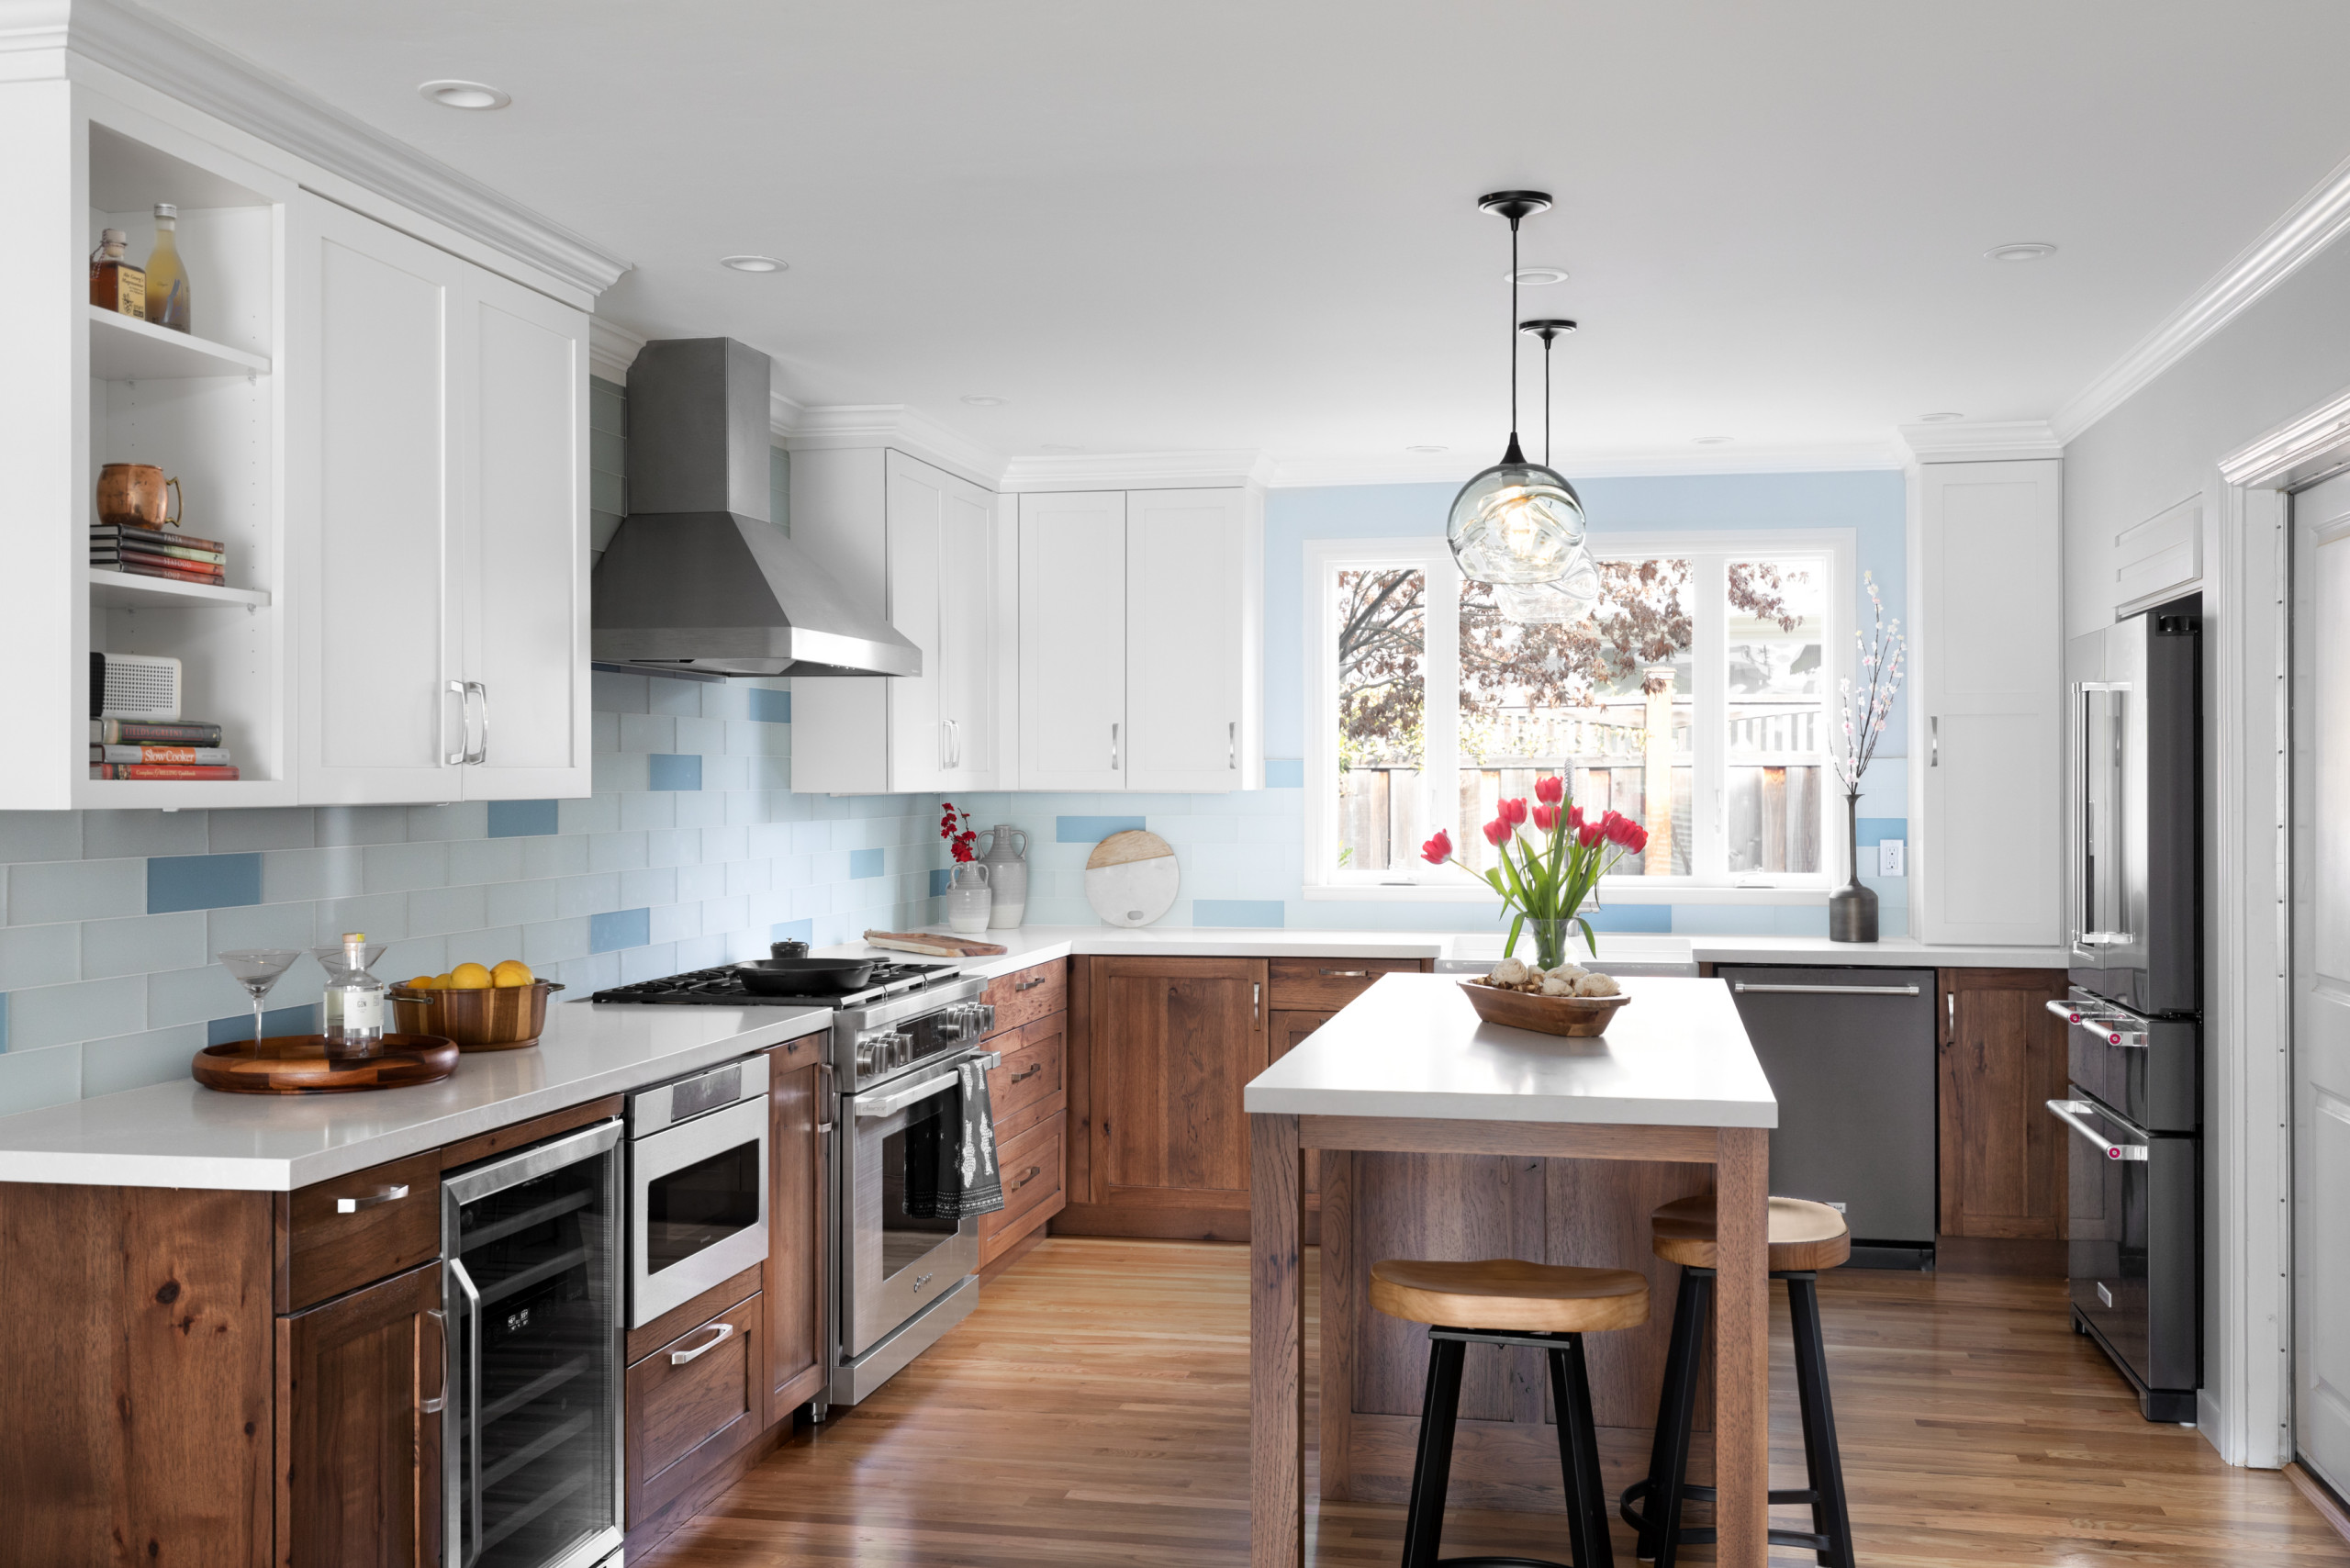 75 Beautiful Kitchen Pictures & Ideas - March, 2021 - Houzz